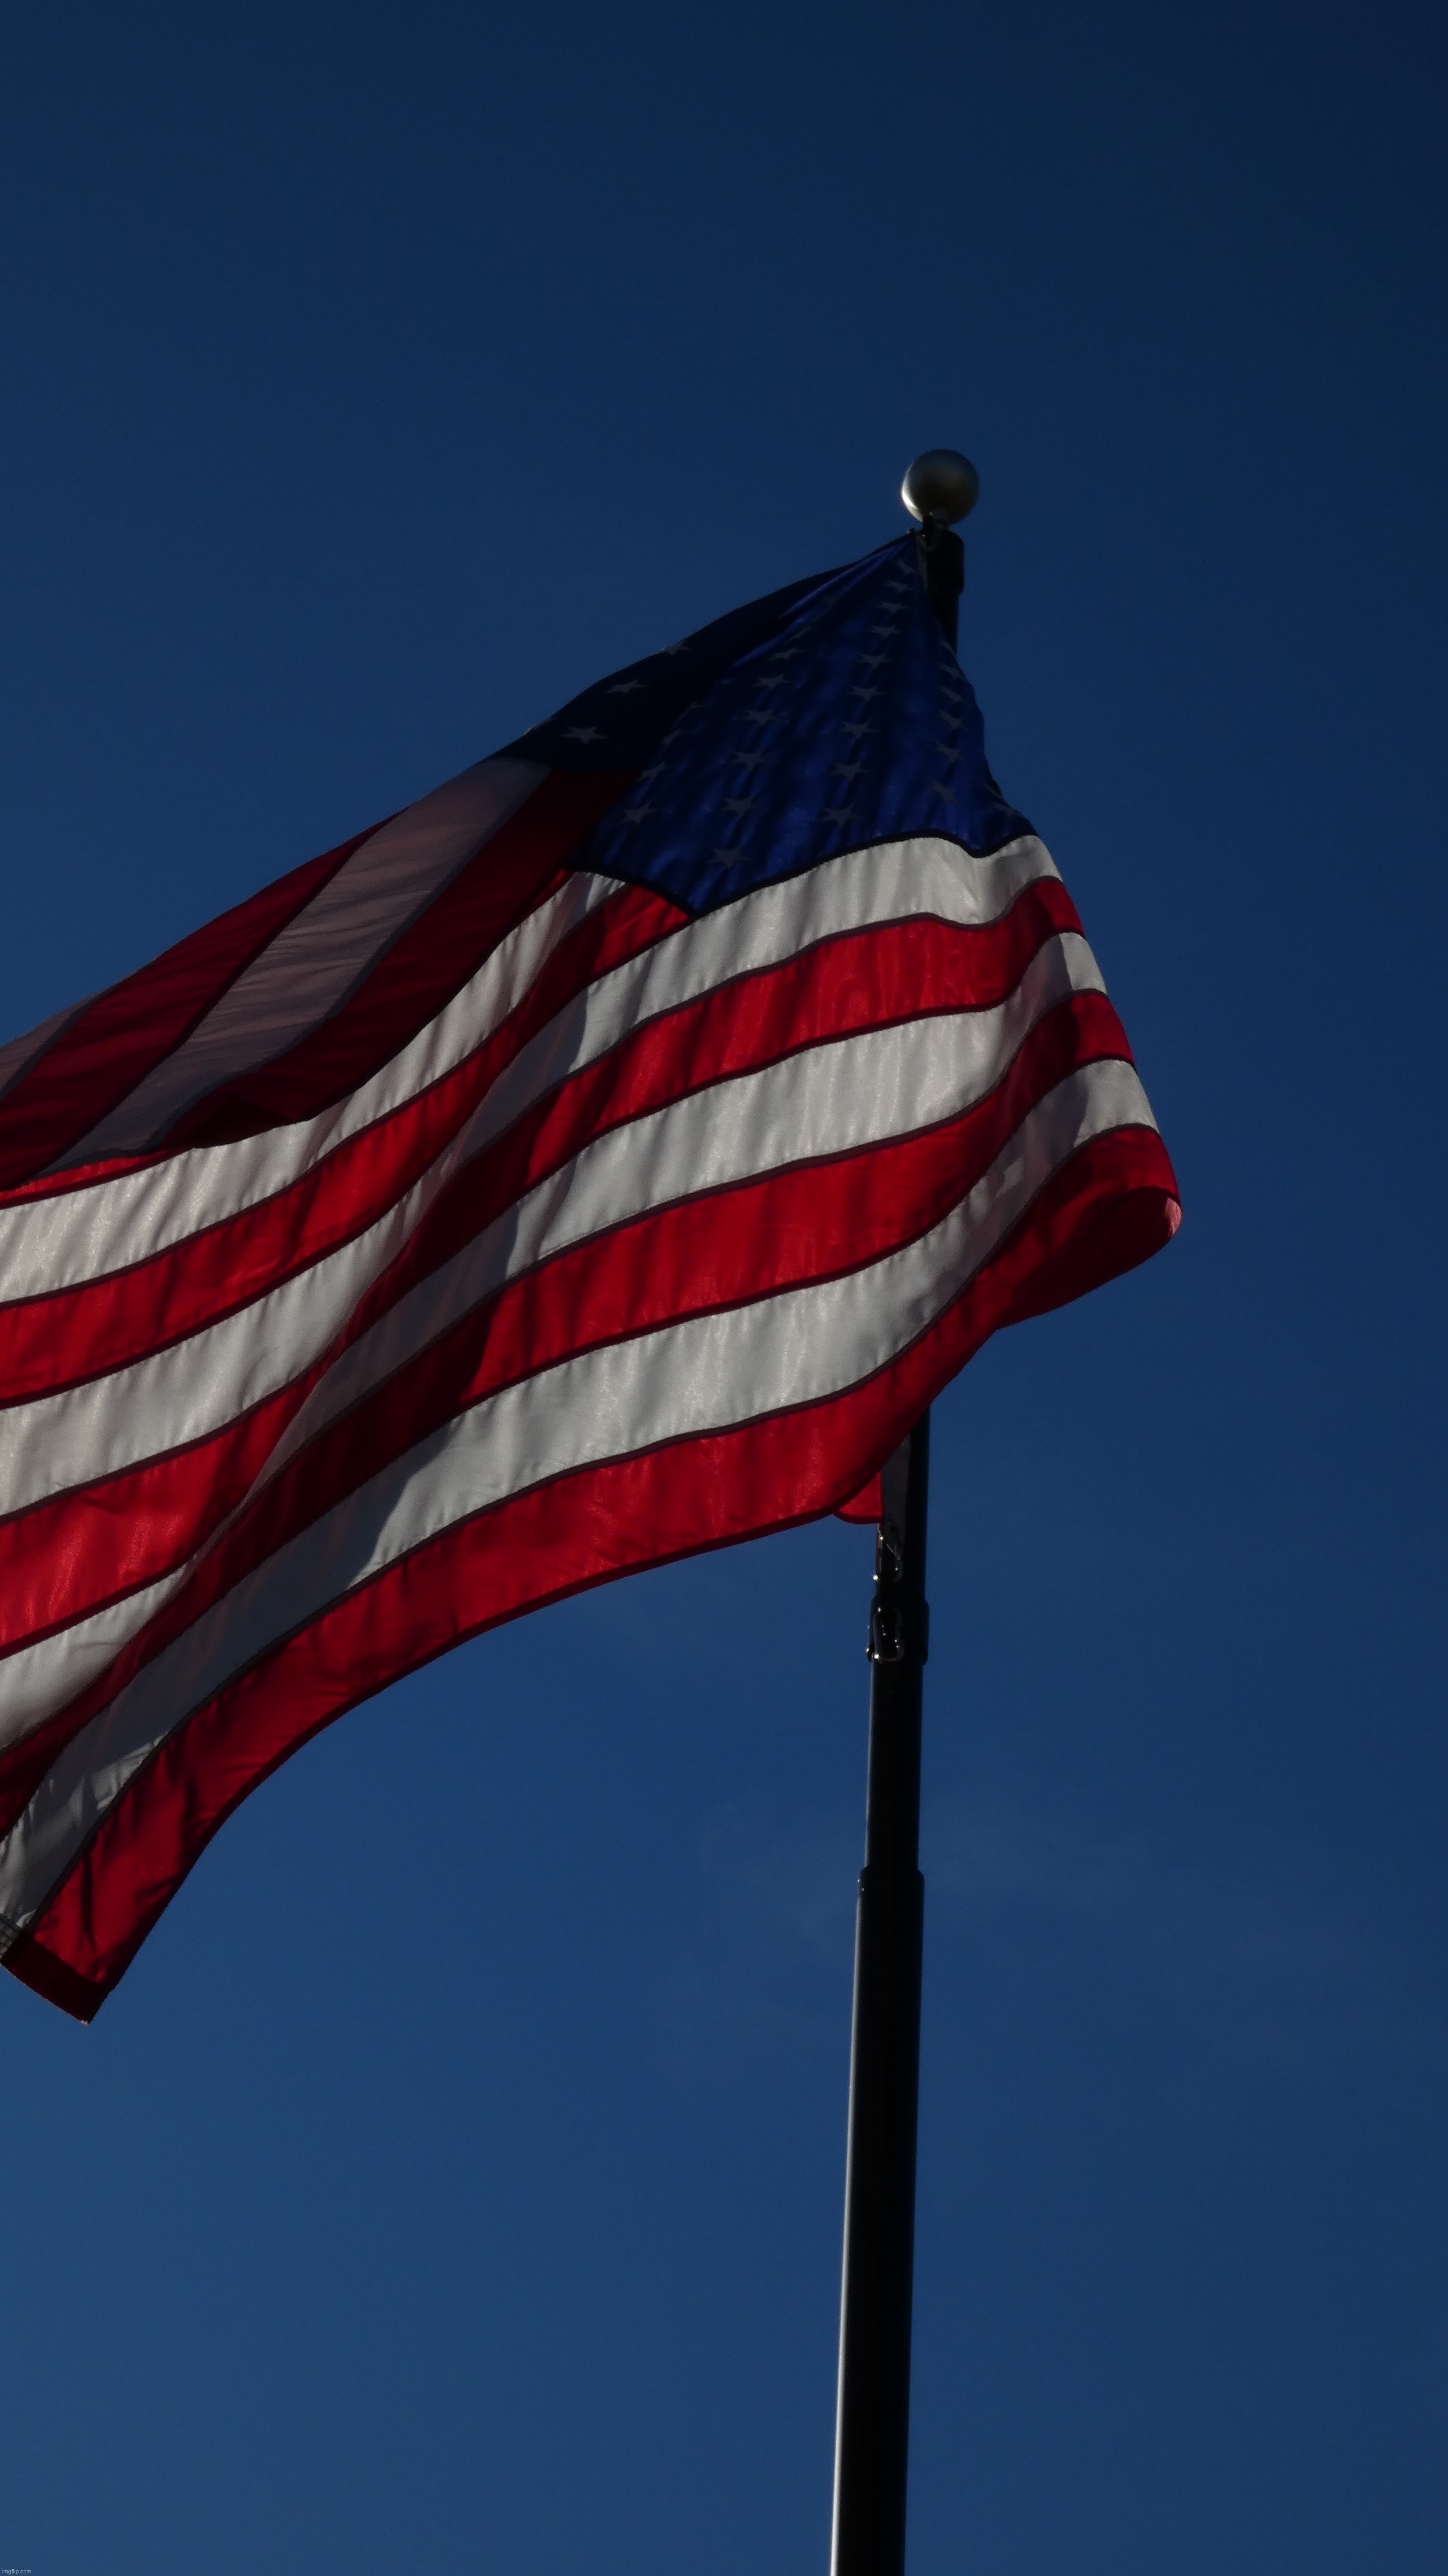 A picture of the American flag that I took with my new camera | image tagged in share your own photos,panasonic lumix fz80 | made w/ Imgflip meme maker